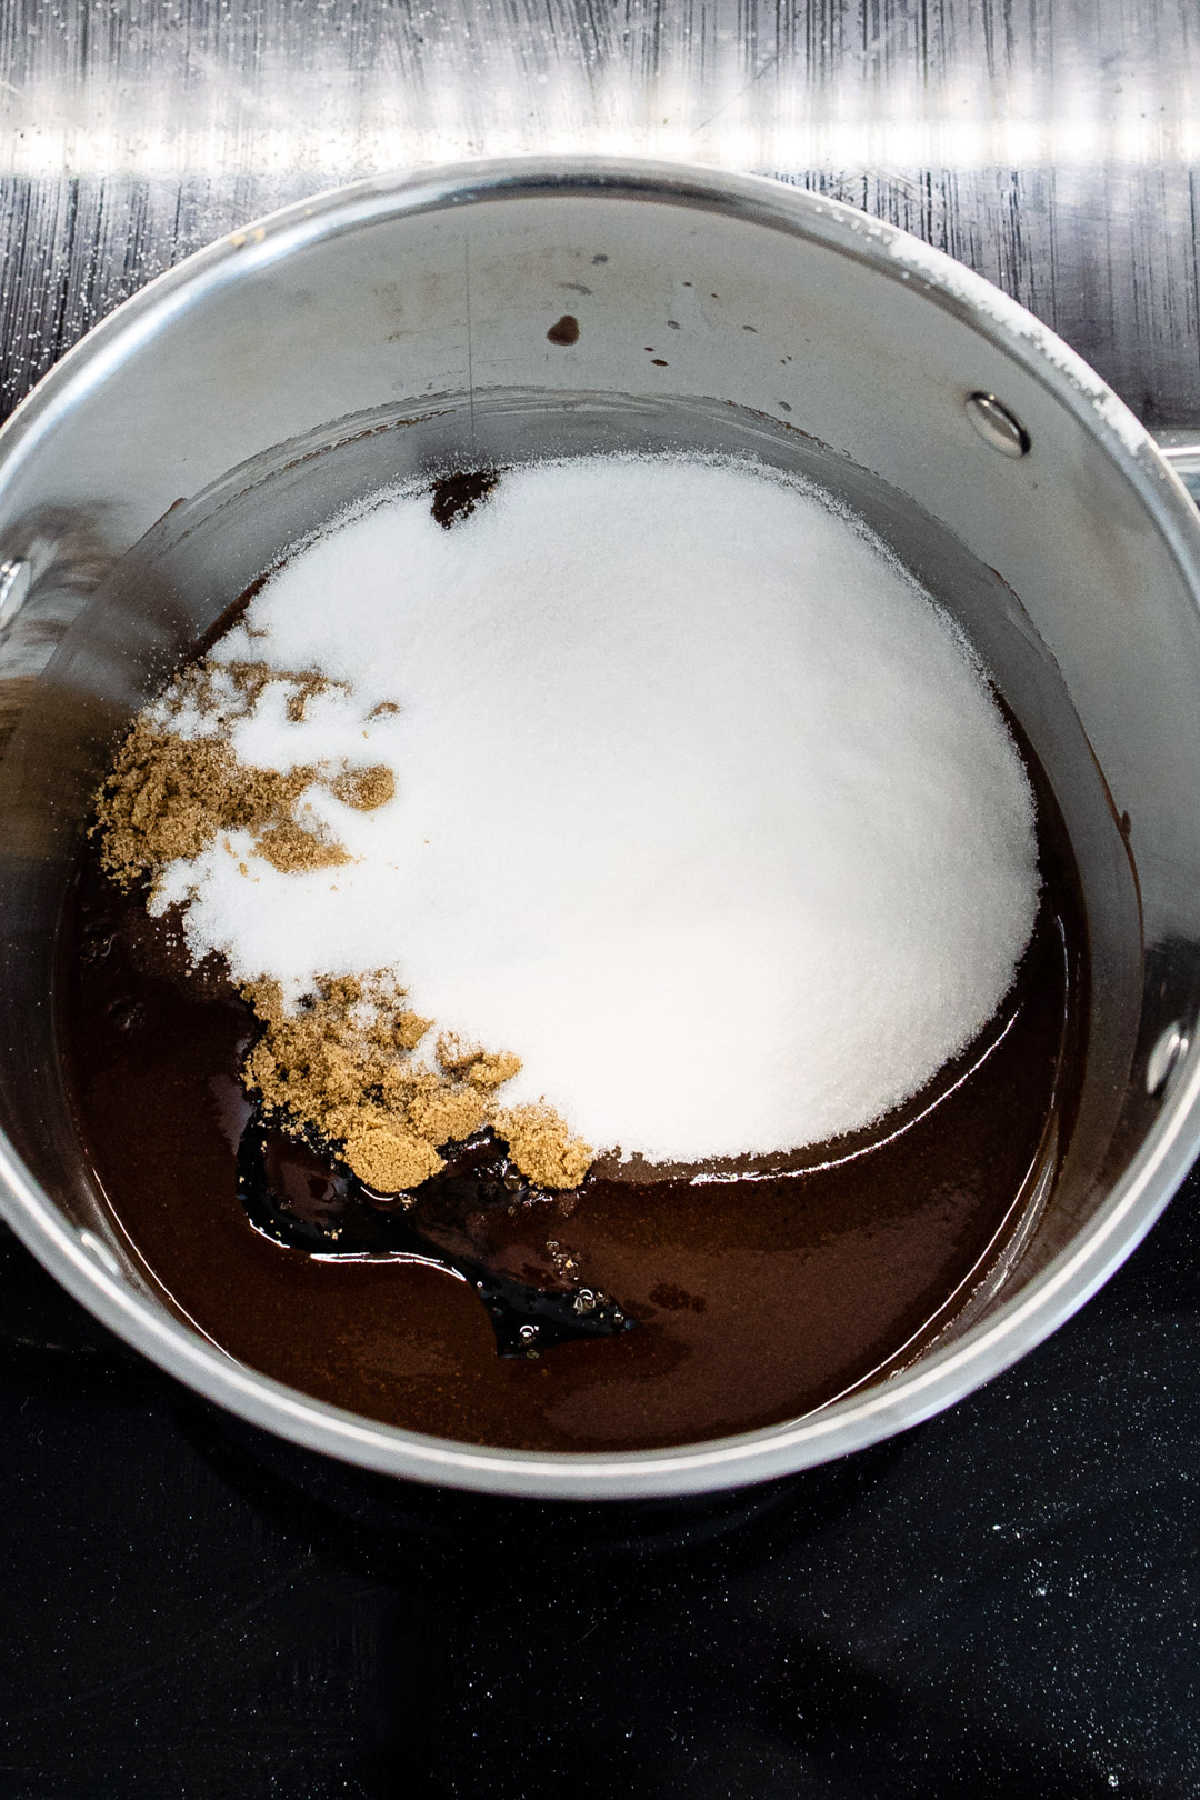 Sugars in melted butter and chocolate.